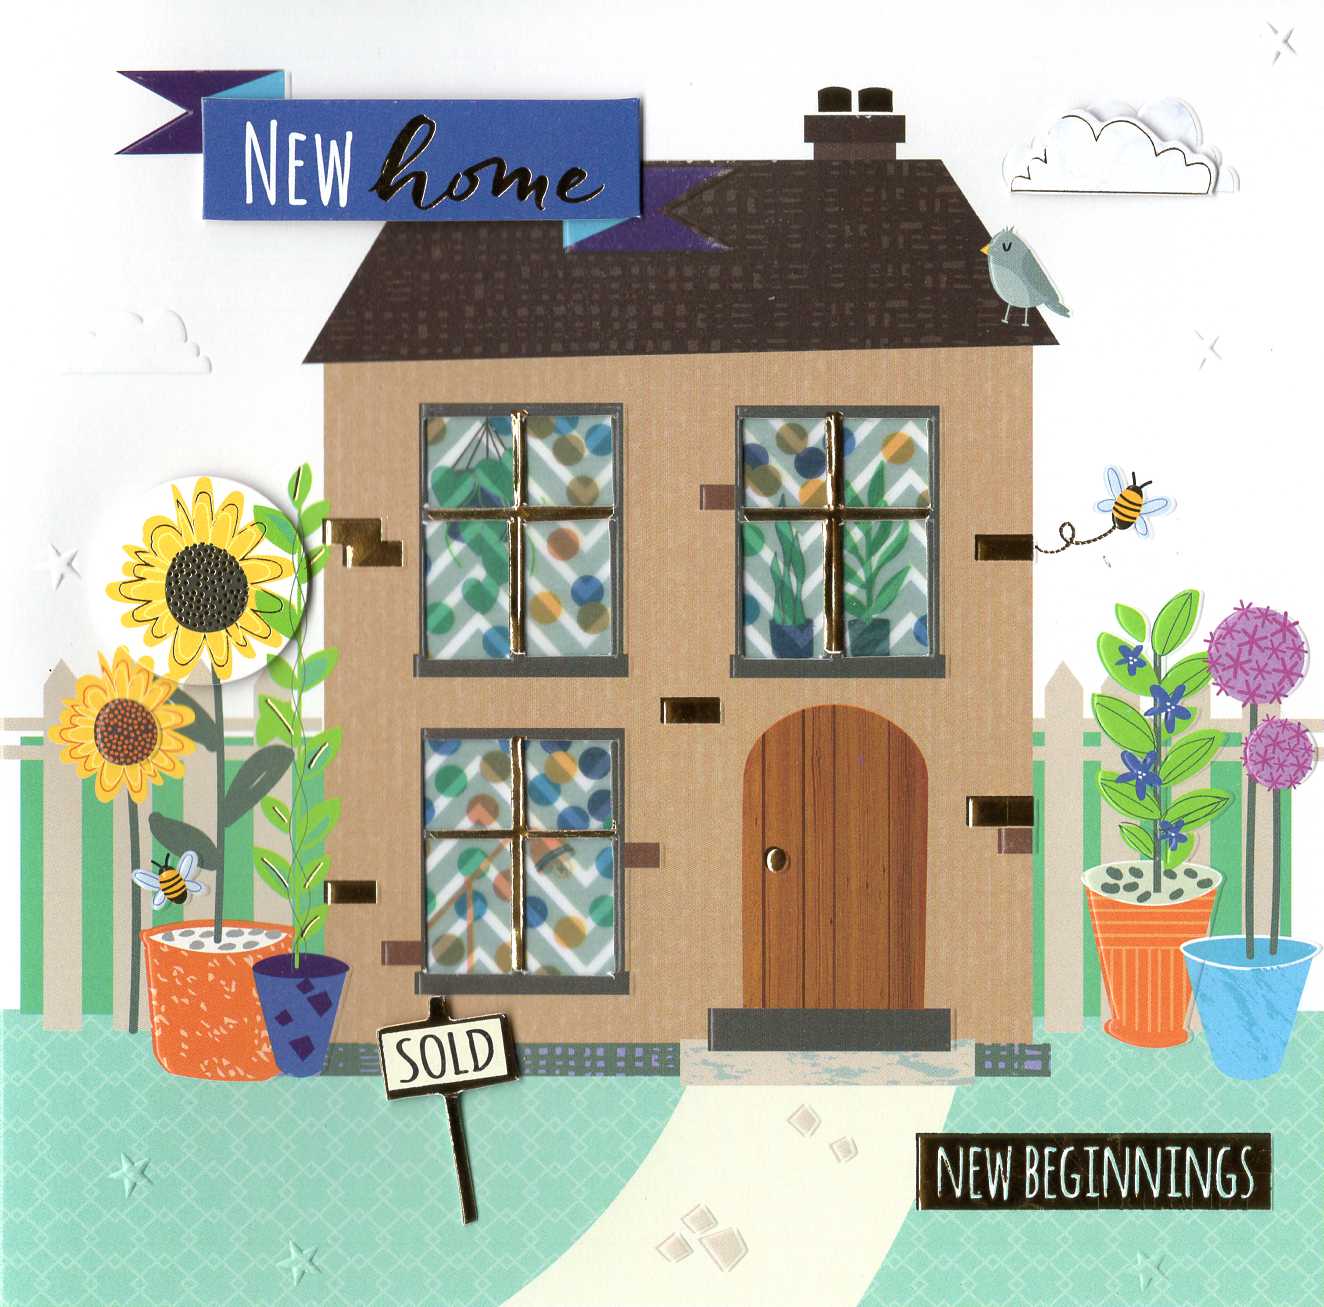 New Home New Beginnings Foiled & Embellished Greeting Card